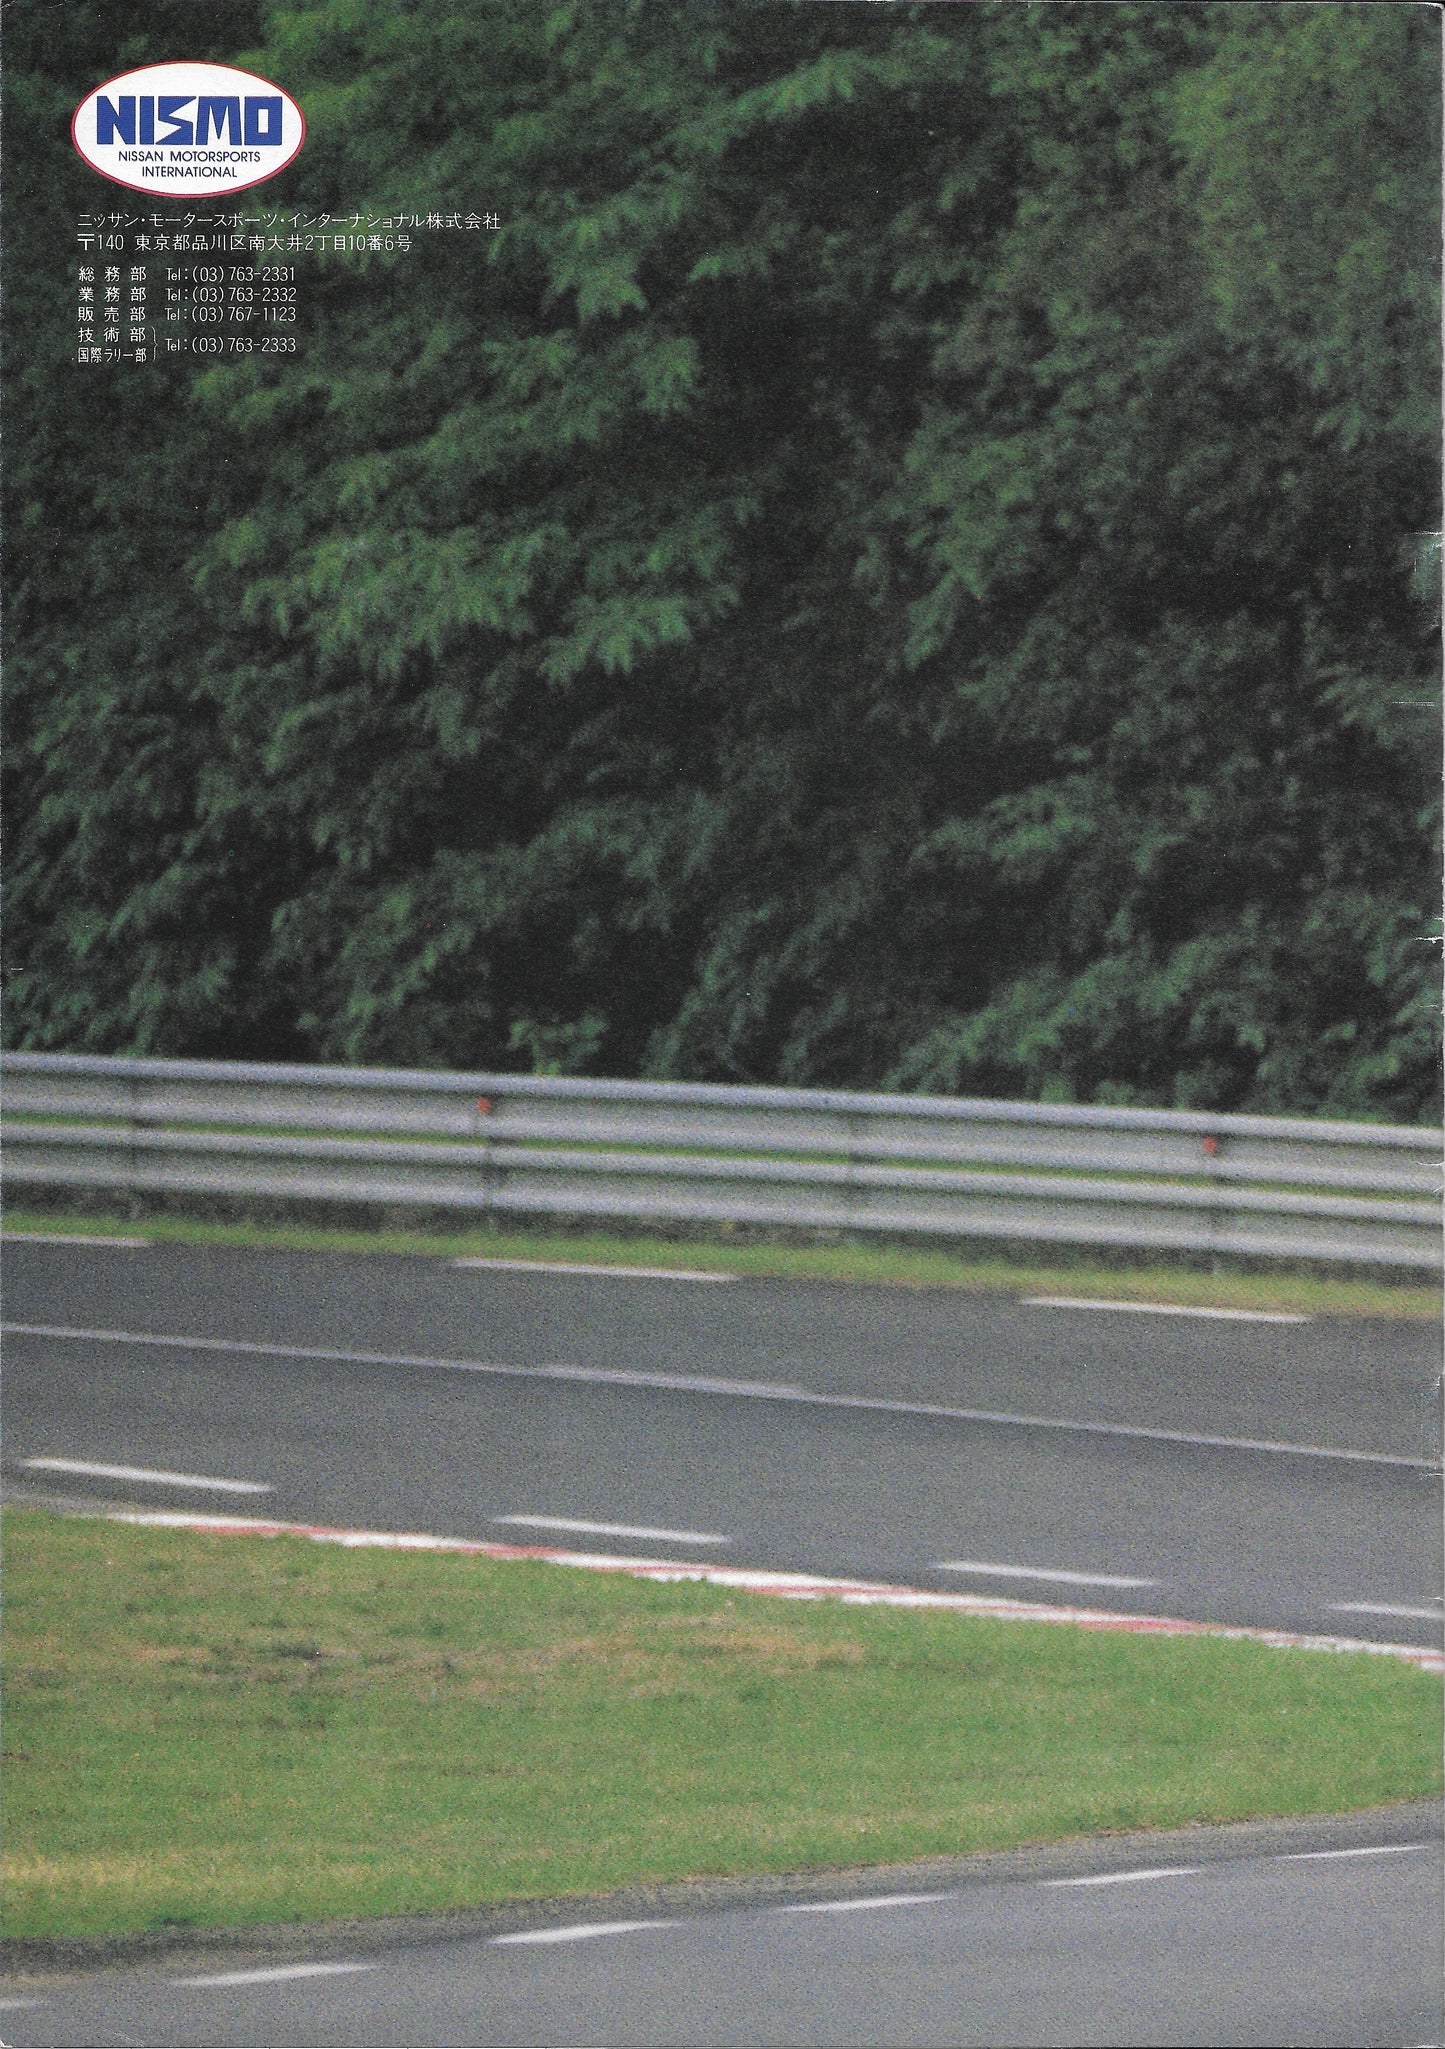 Nissan "What is Nismo?" Magazine